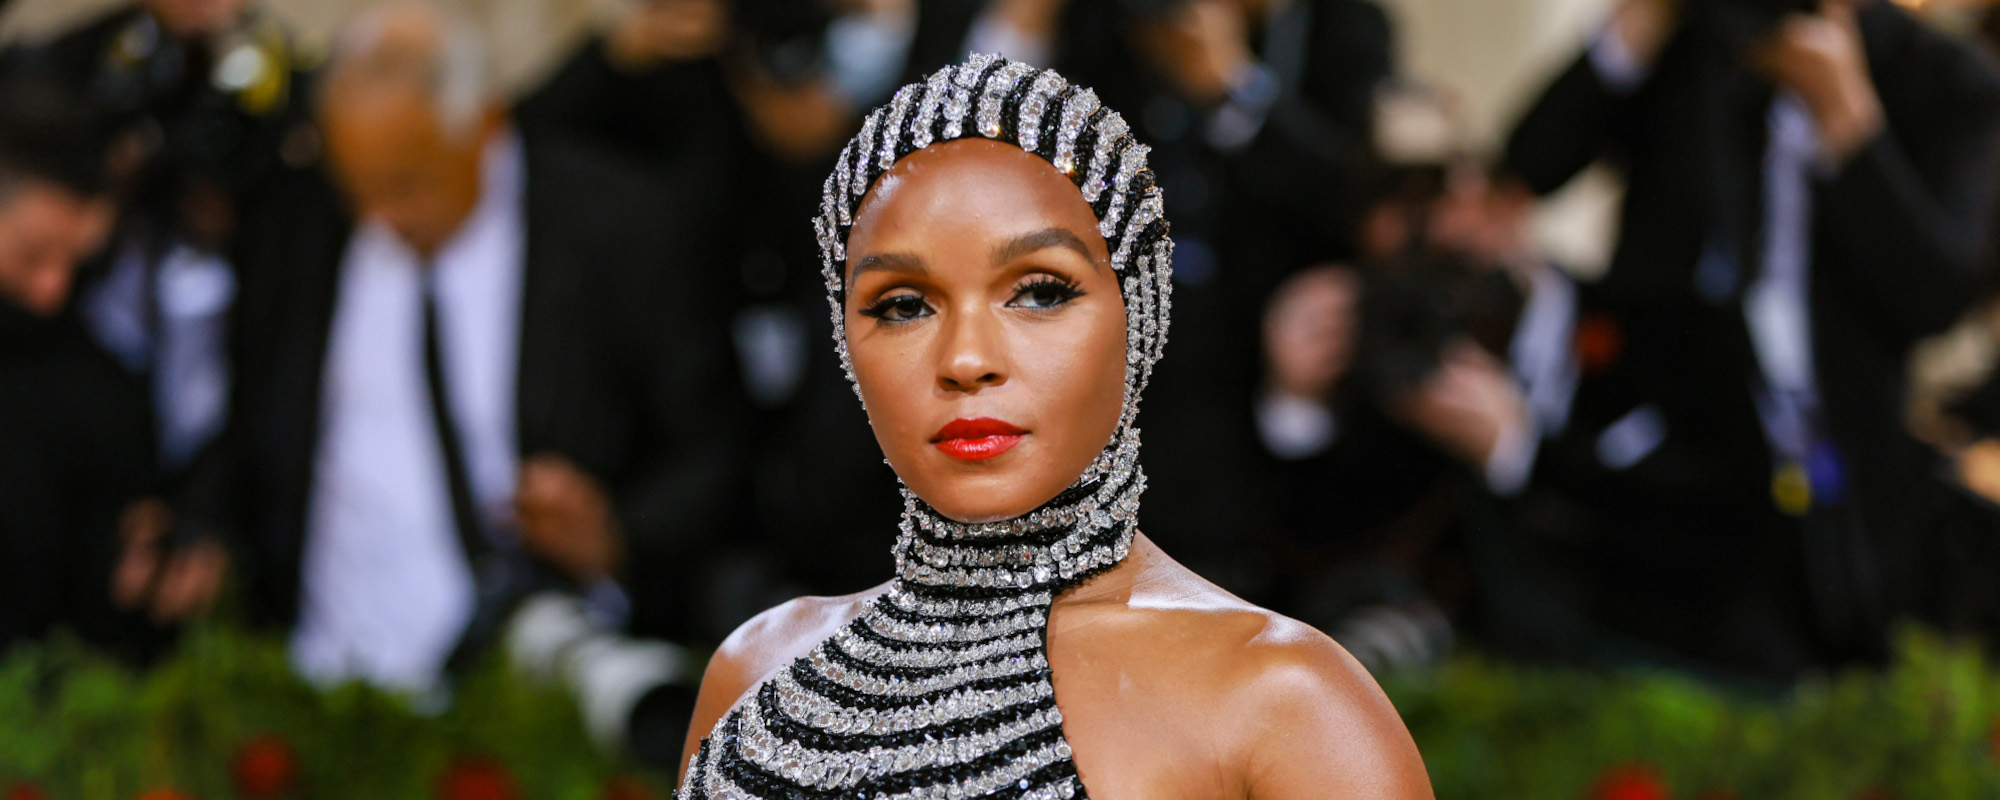 Janelle Monáe Teases New Album: “I Now Have a Clone”